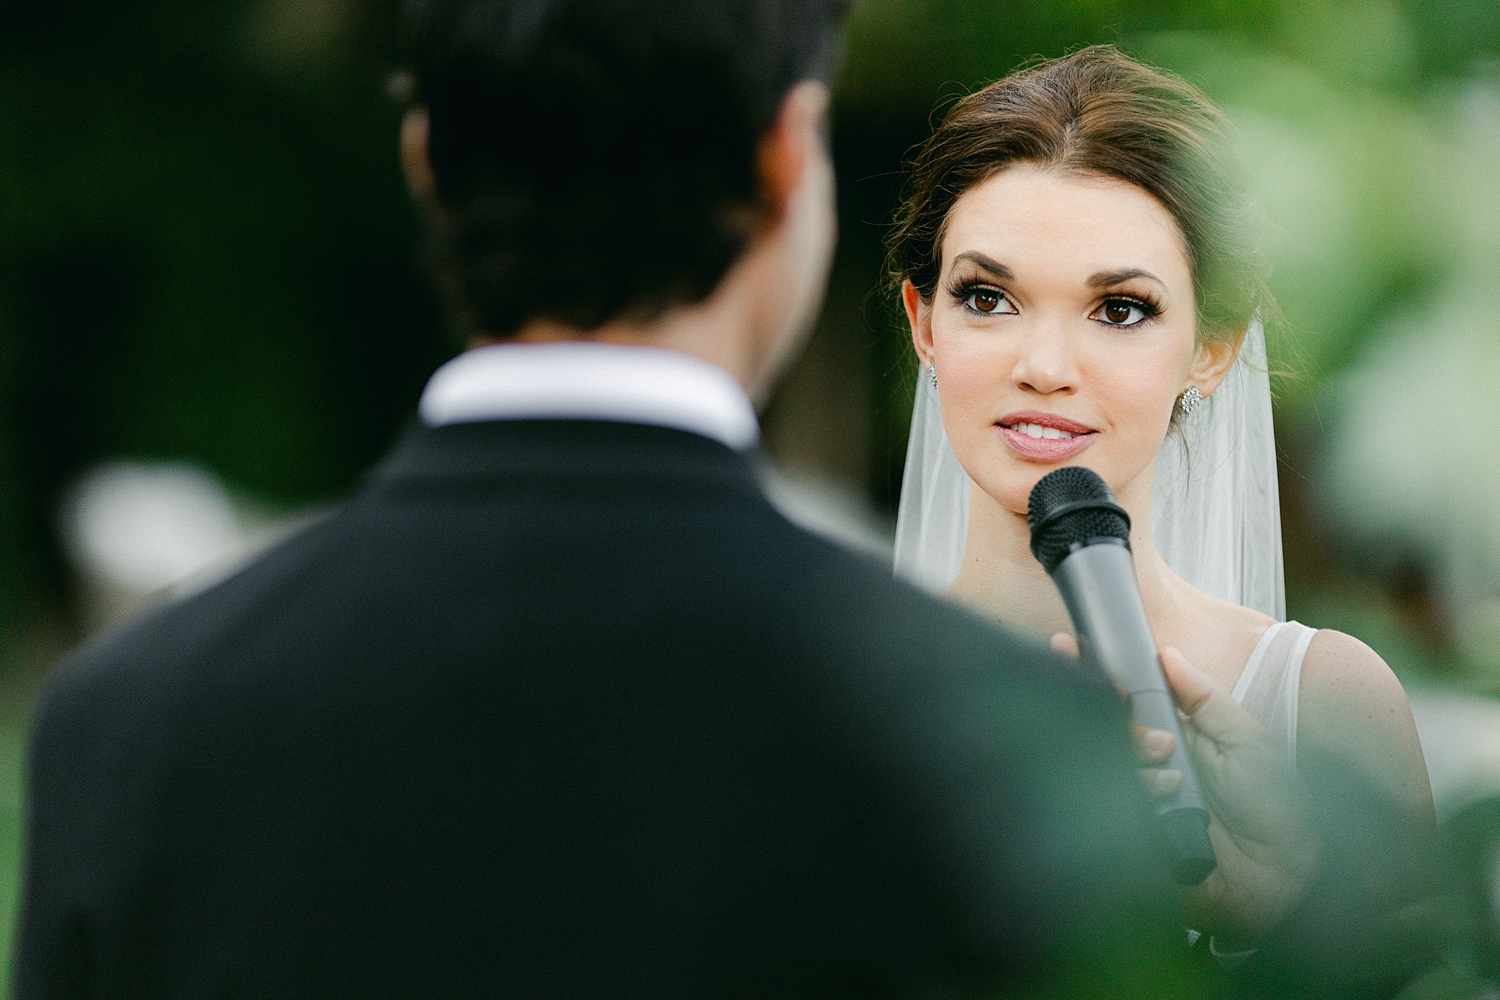 Bride exchanging vows in microphone to groom during wedding ceremony